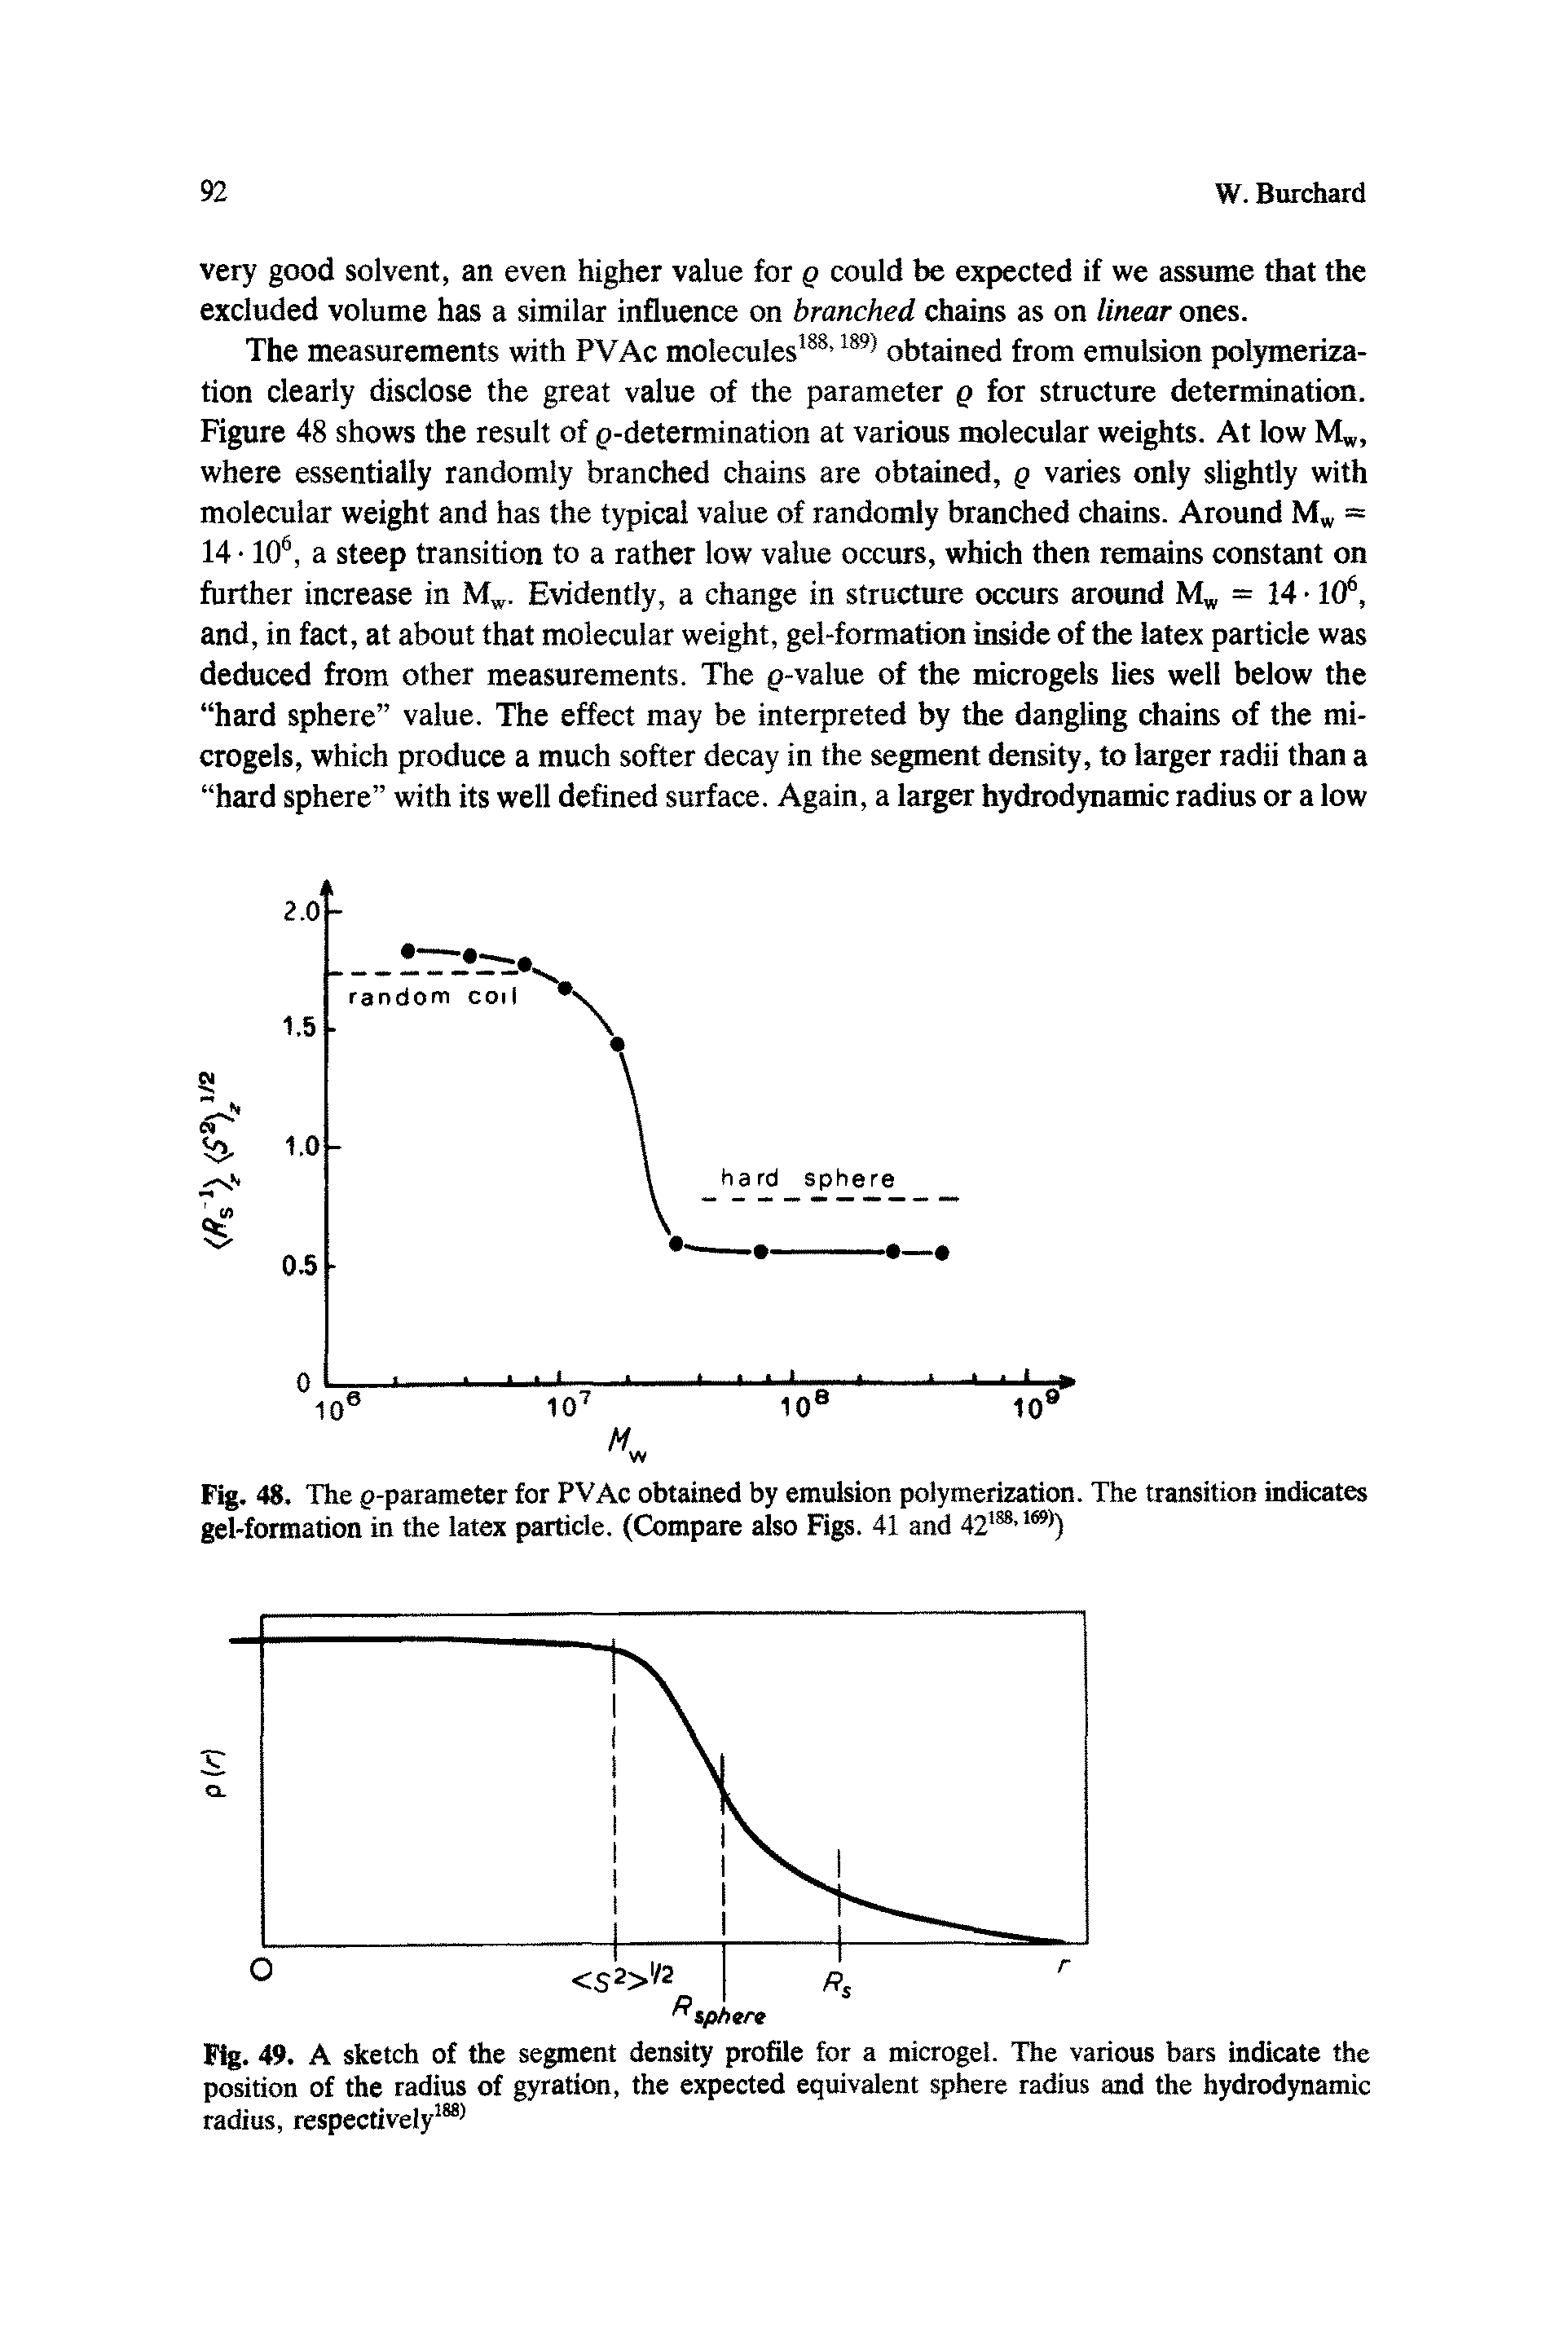 Fig. 48. The o-parameter for PVAc obtained by emulsion polymerization. The transition indicates gel-formation in the latex particle. (Compare also Figs. 41 and 42188 16,>)...